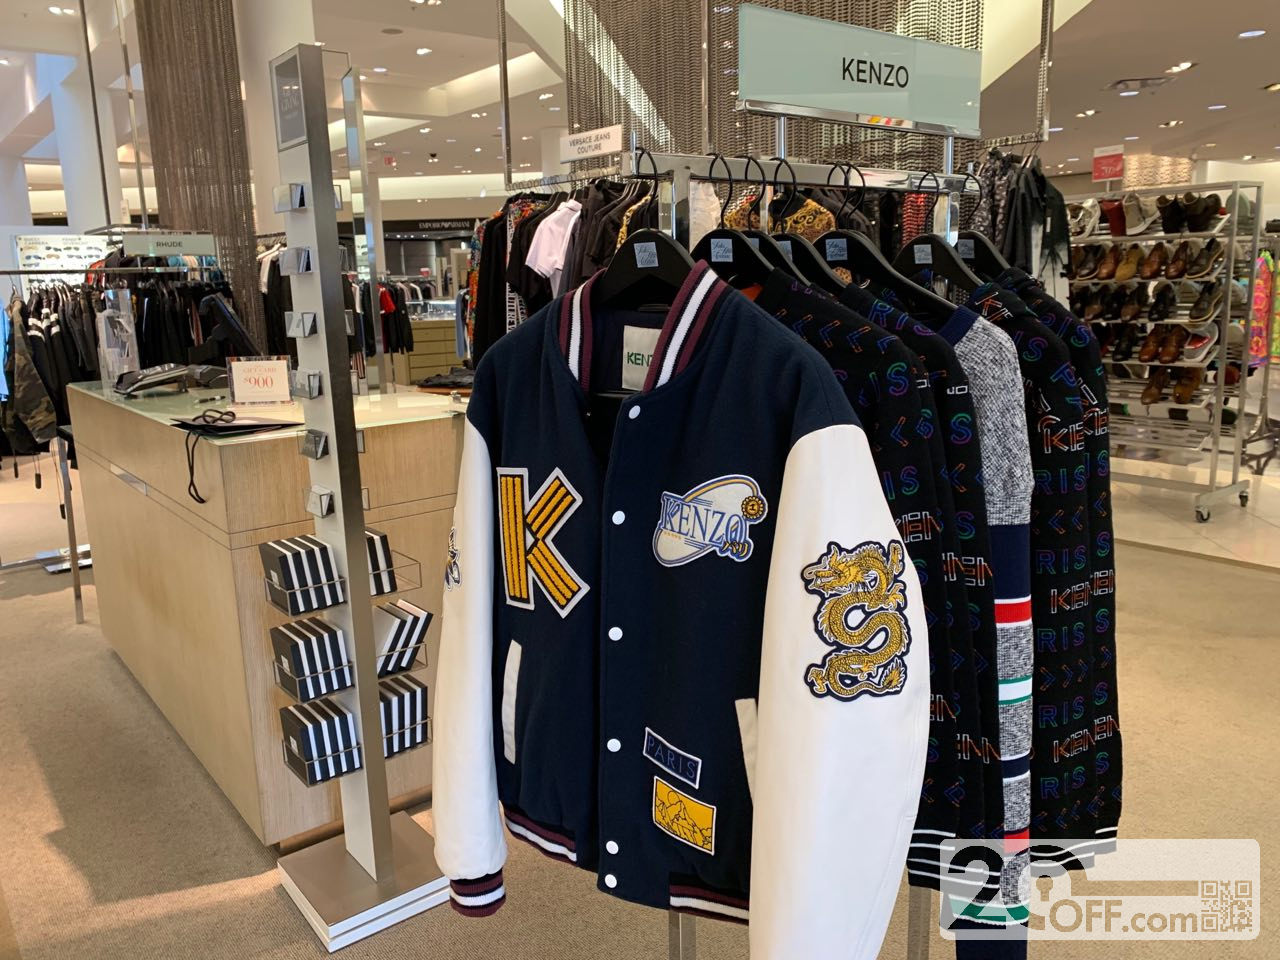 Kenzo Clothing At Saks Fifth Avenue